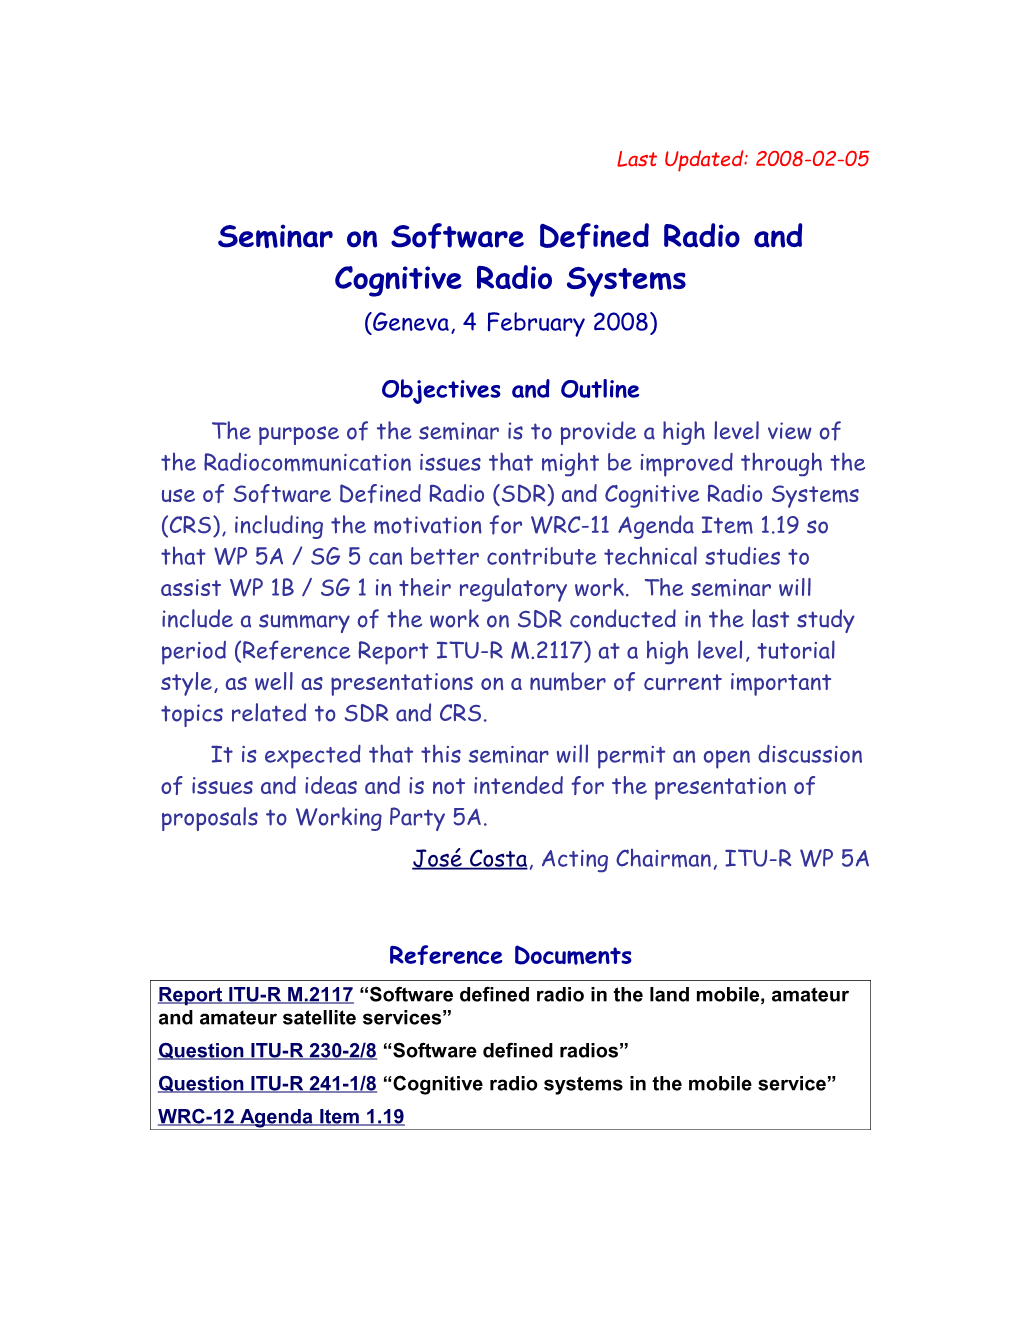 Seminar on Software Defined Radio and Cognitive Radio Systems